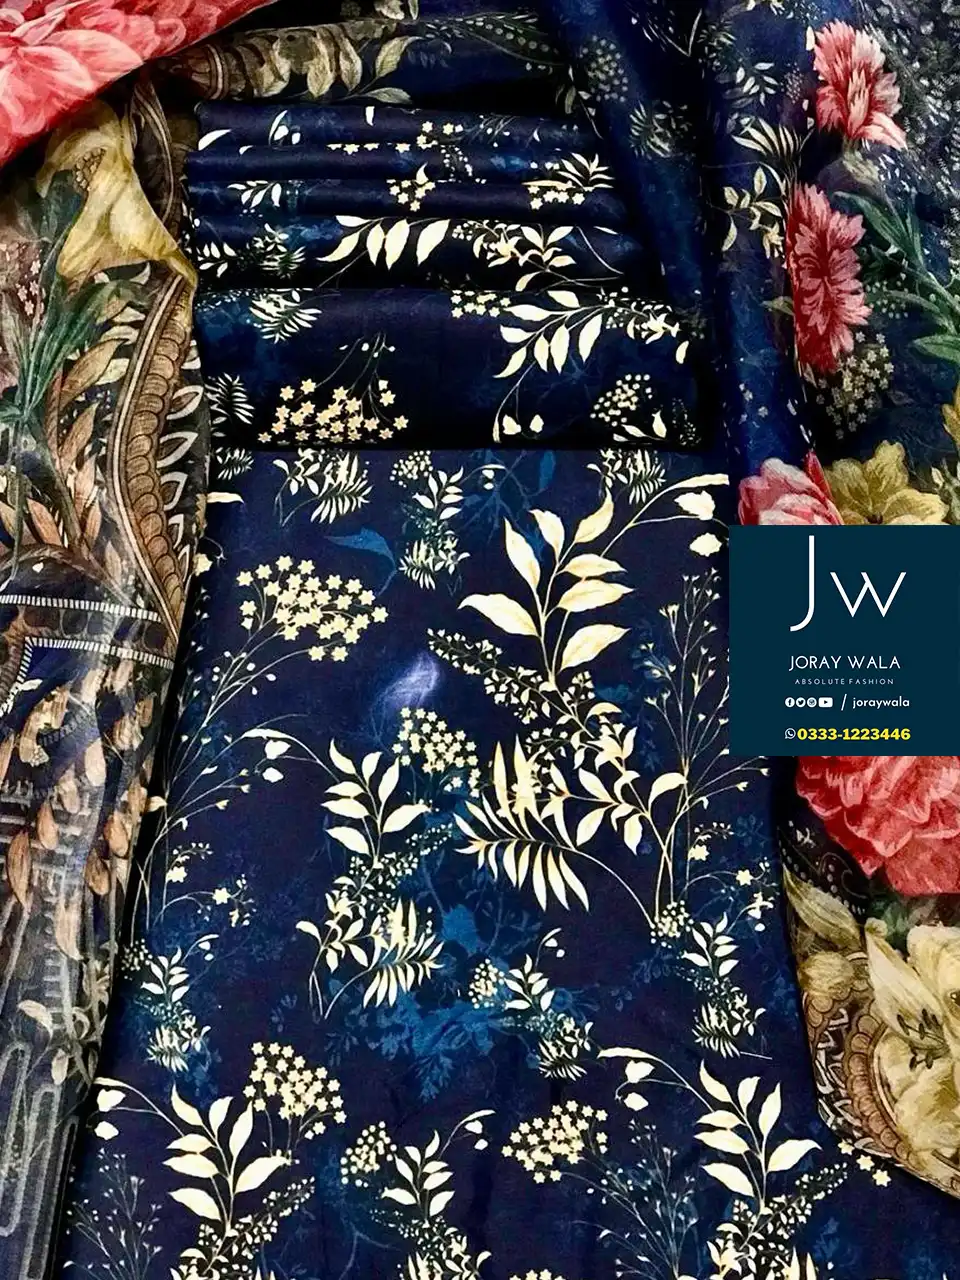 Digital Printed Swiss Lawn D23 with free delivery available at joraywala